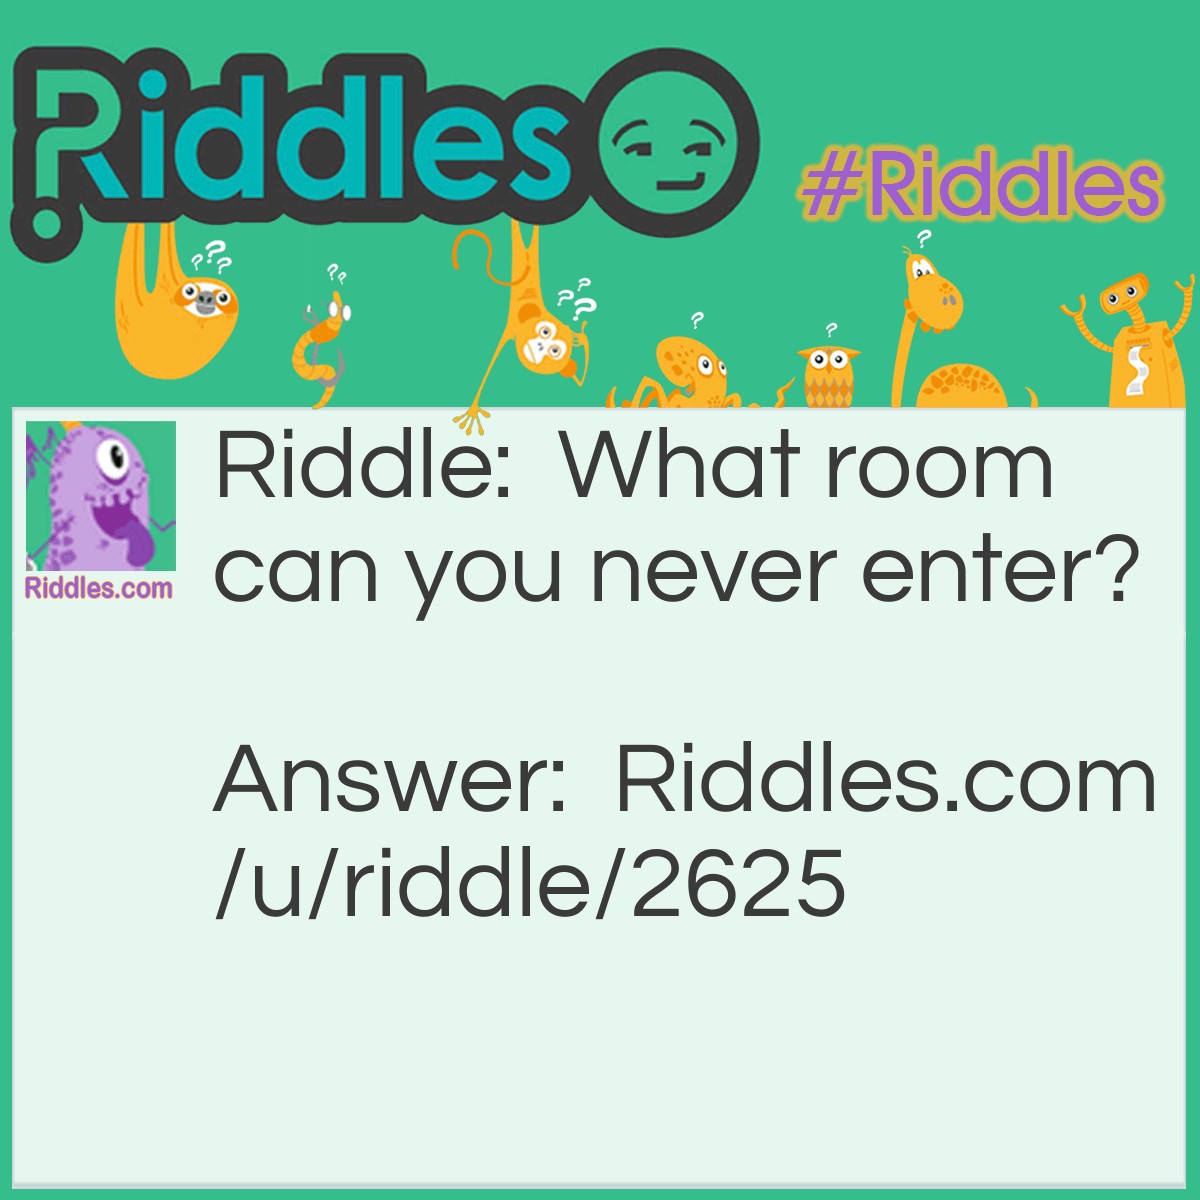 Riddle: What room can you never enter? Answer: A mushroom.